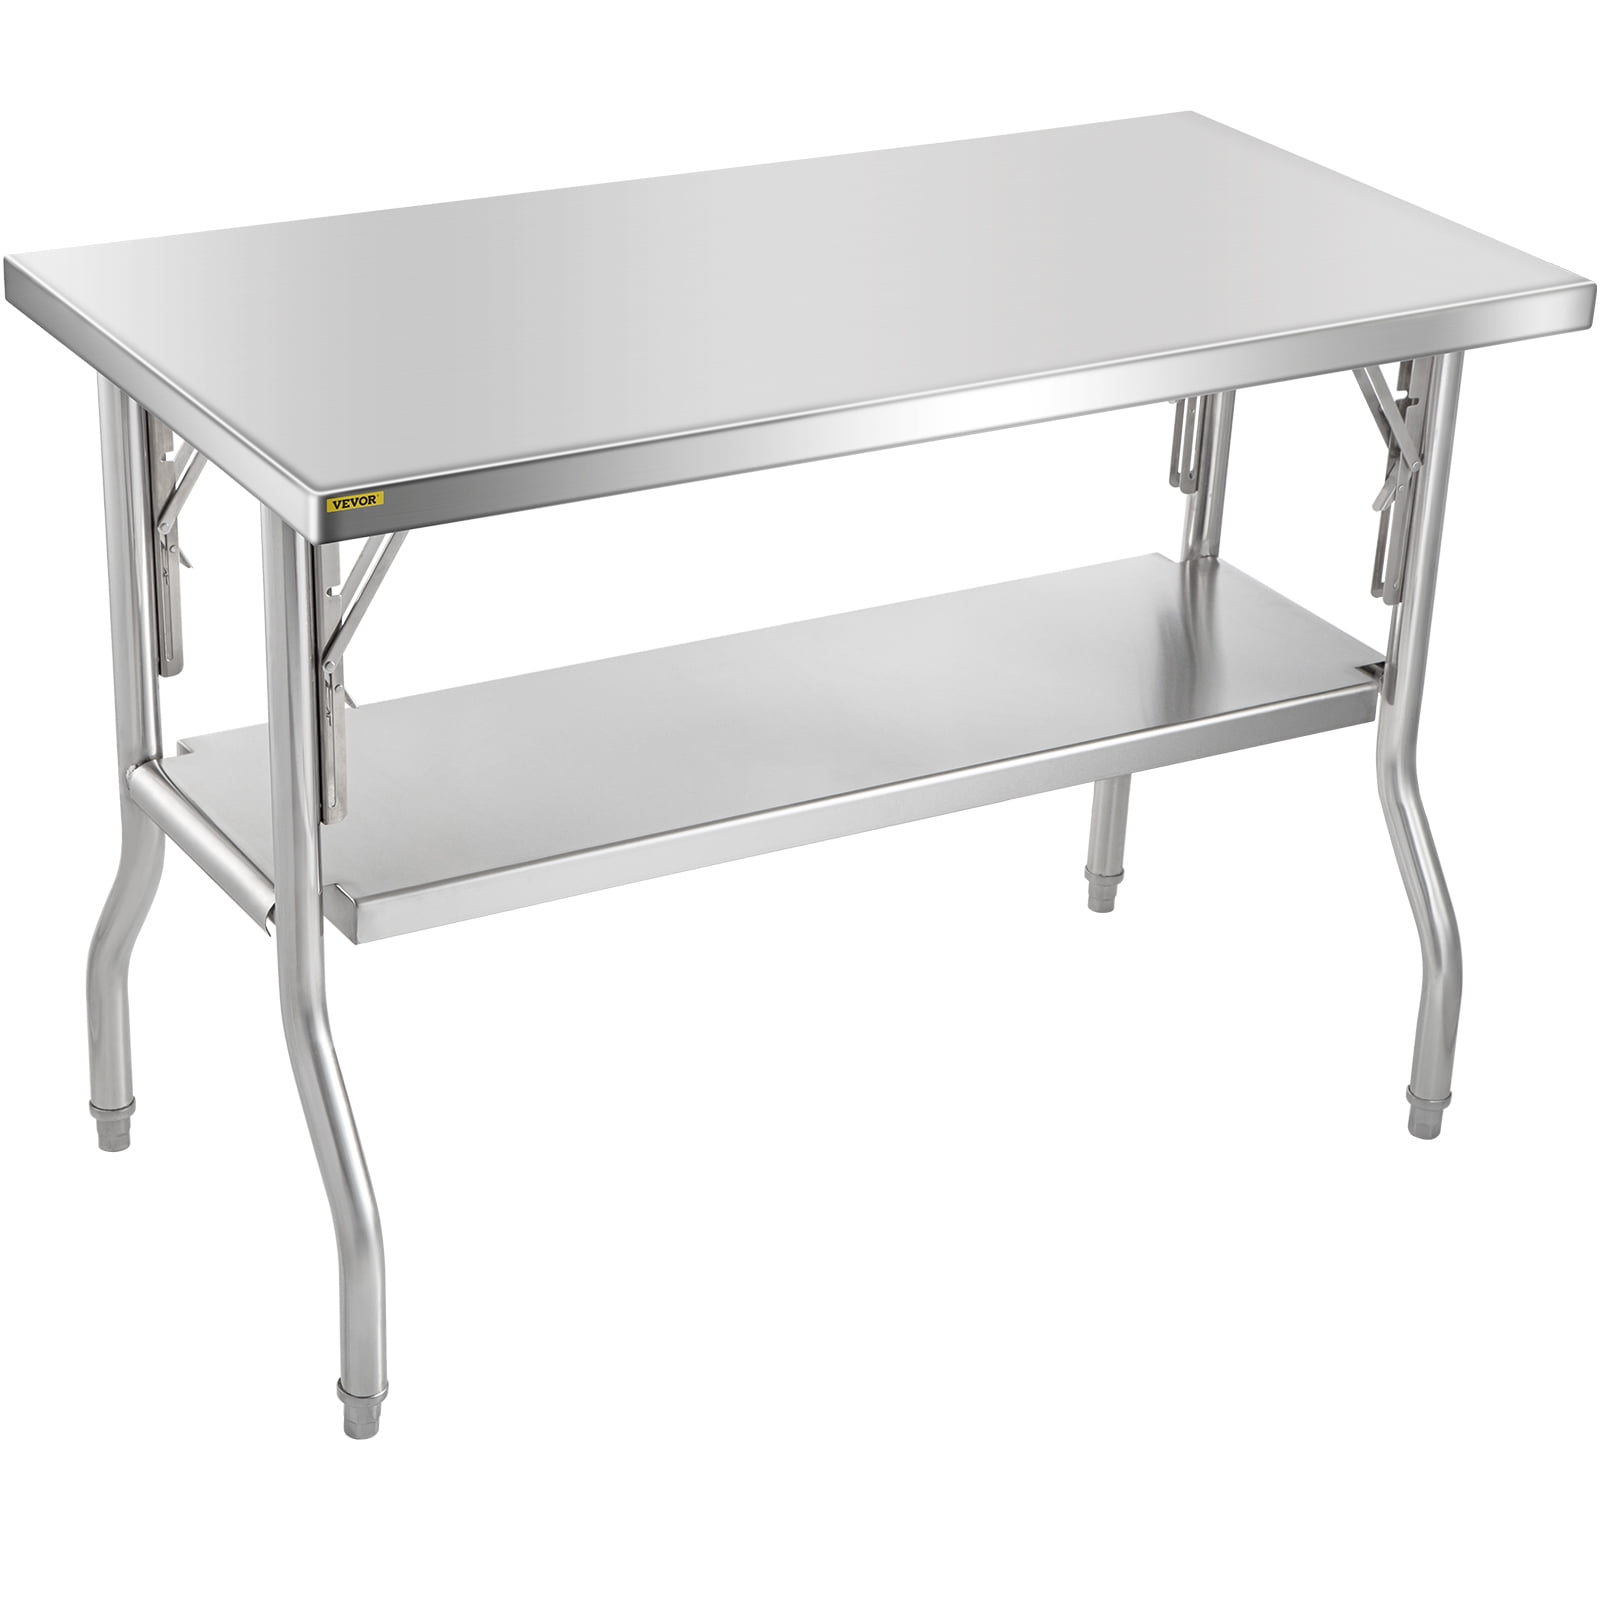 Shimmy Stainless Steel Work & Prep Table 24 x 48 Inches Table for Commercial Kitchen and Restaurant 